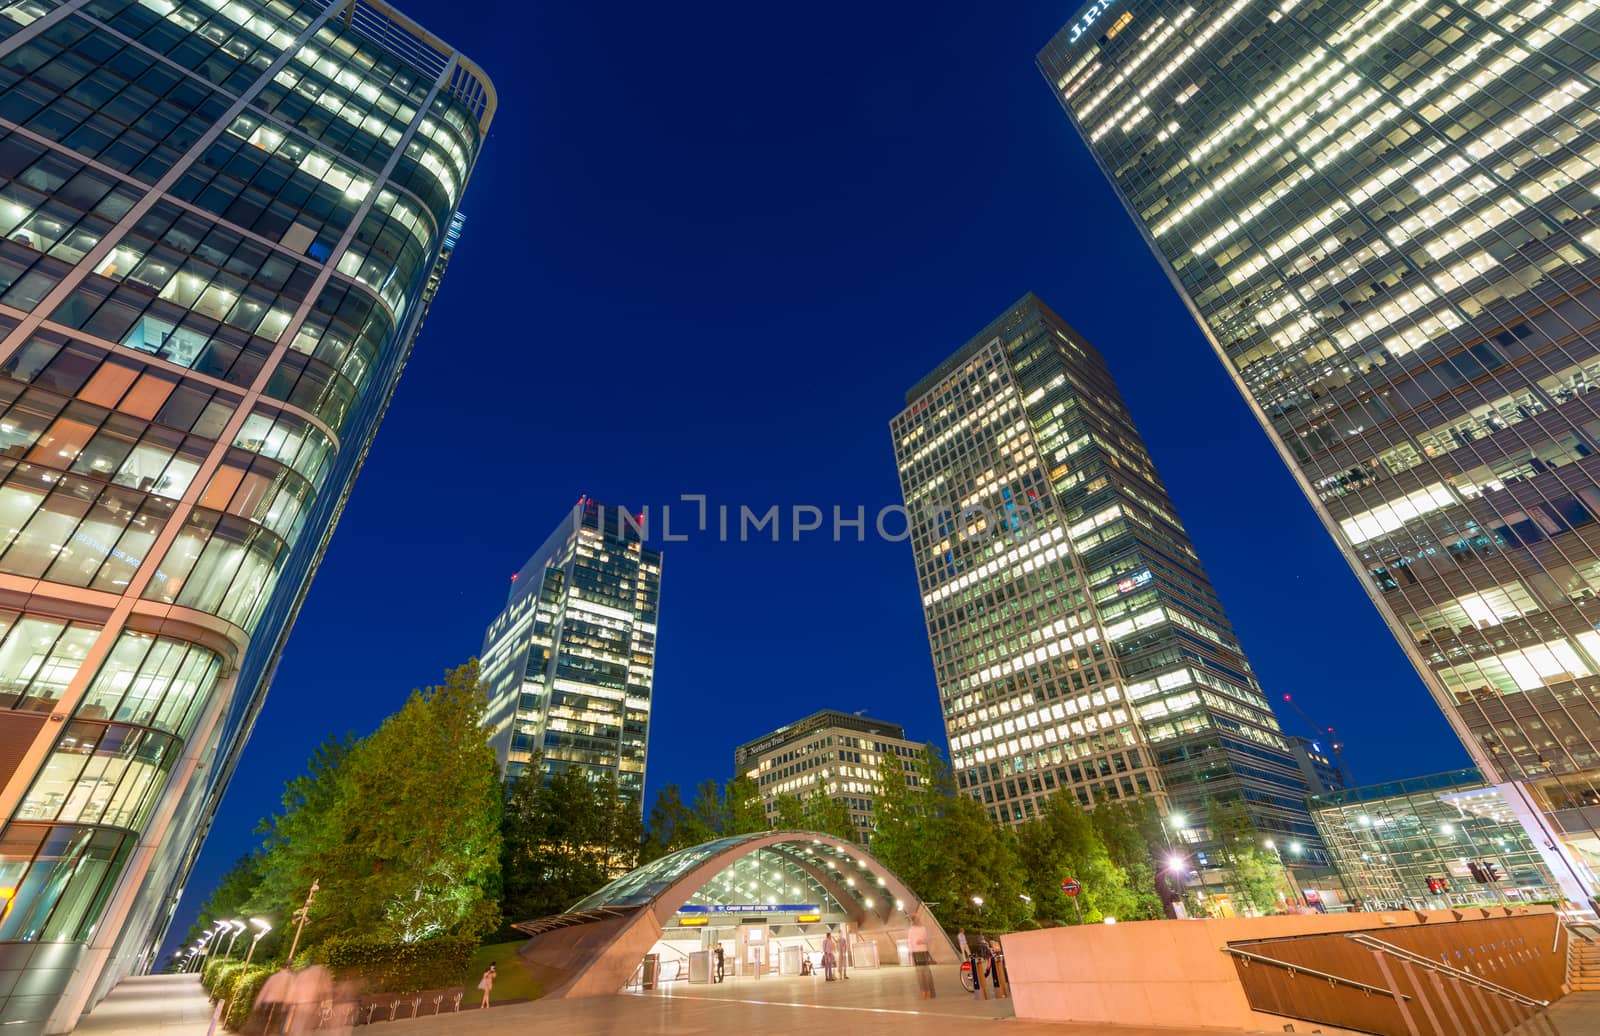 LONDON - JUNE 29, 2015: Canary Wharf skyscrapers at night. Canary Wharf is a financial city dictrict.